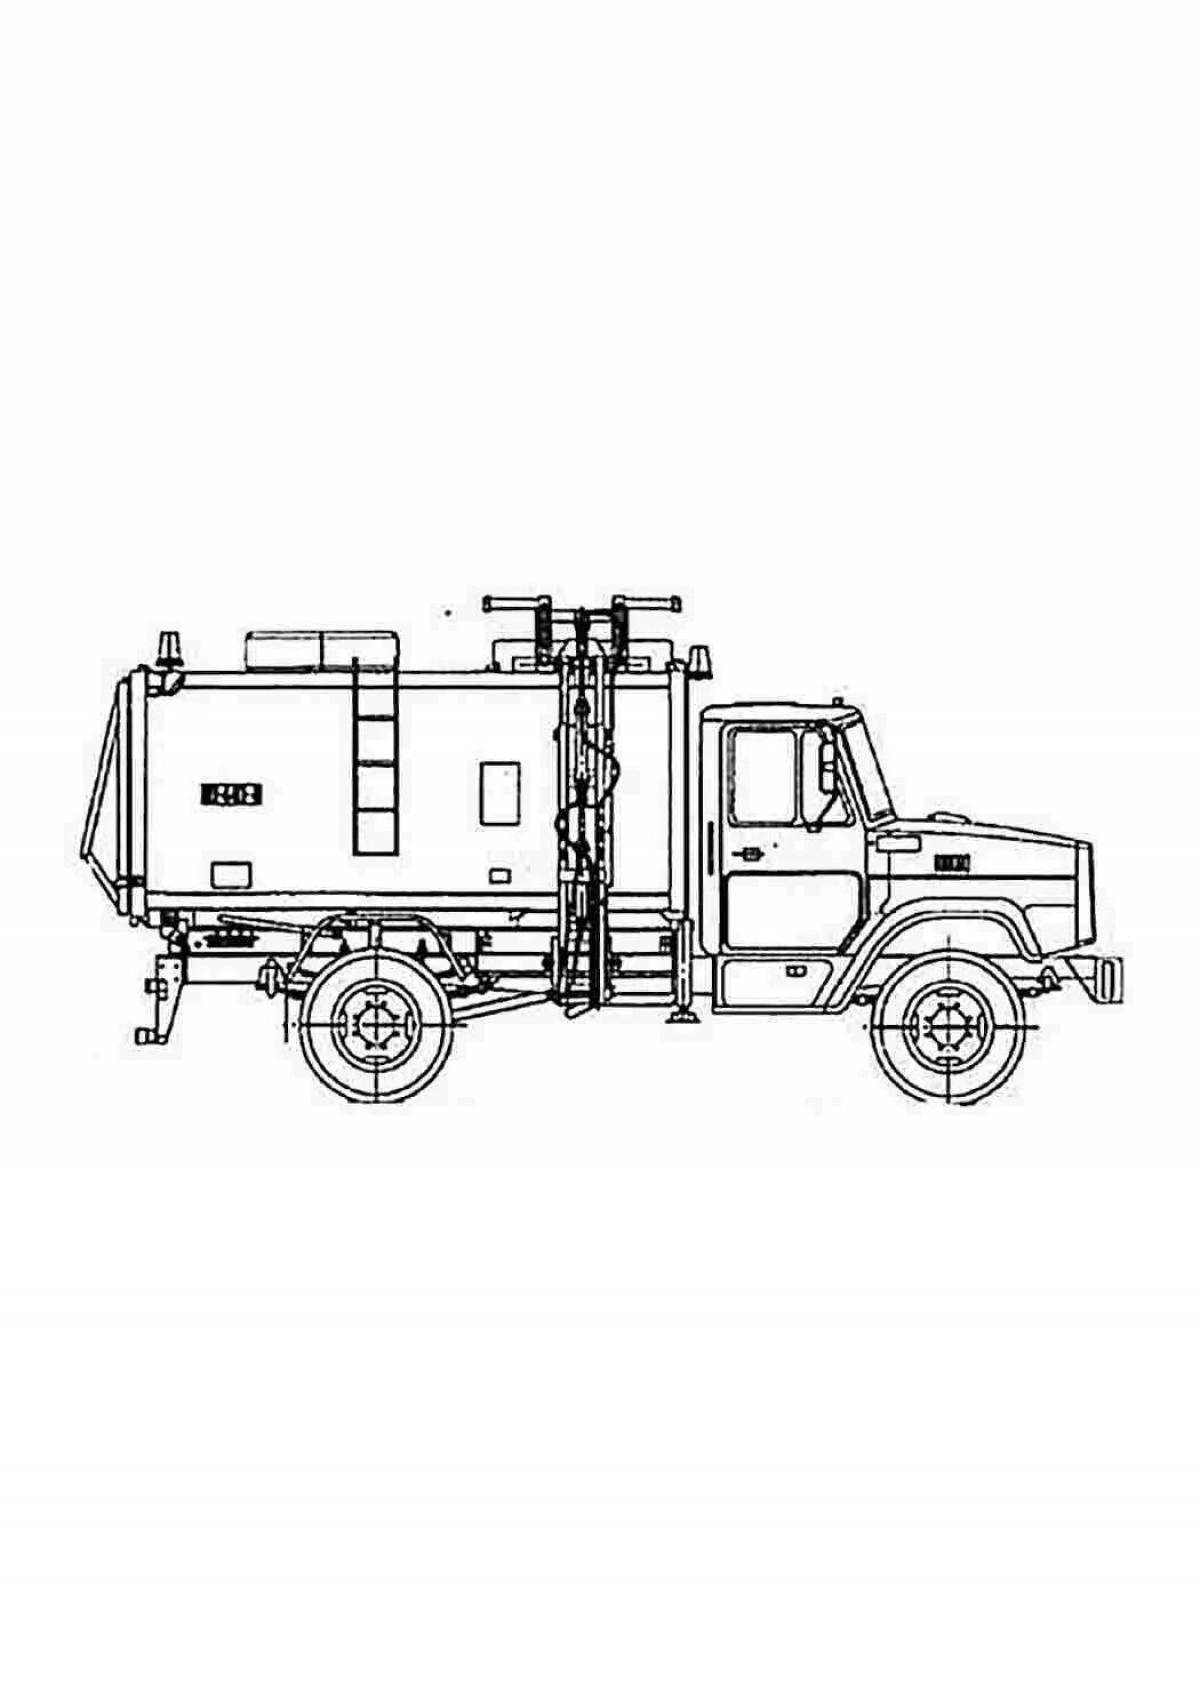 Exquisite sewer car coloring page